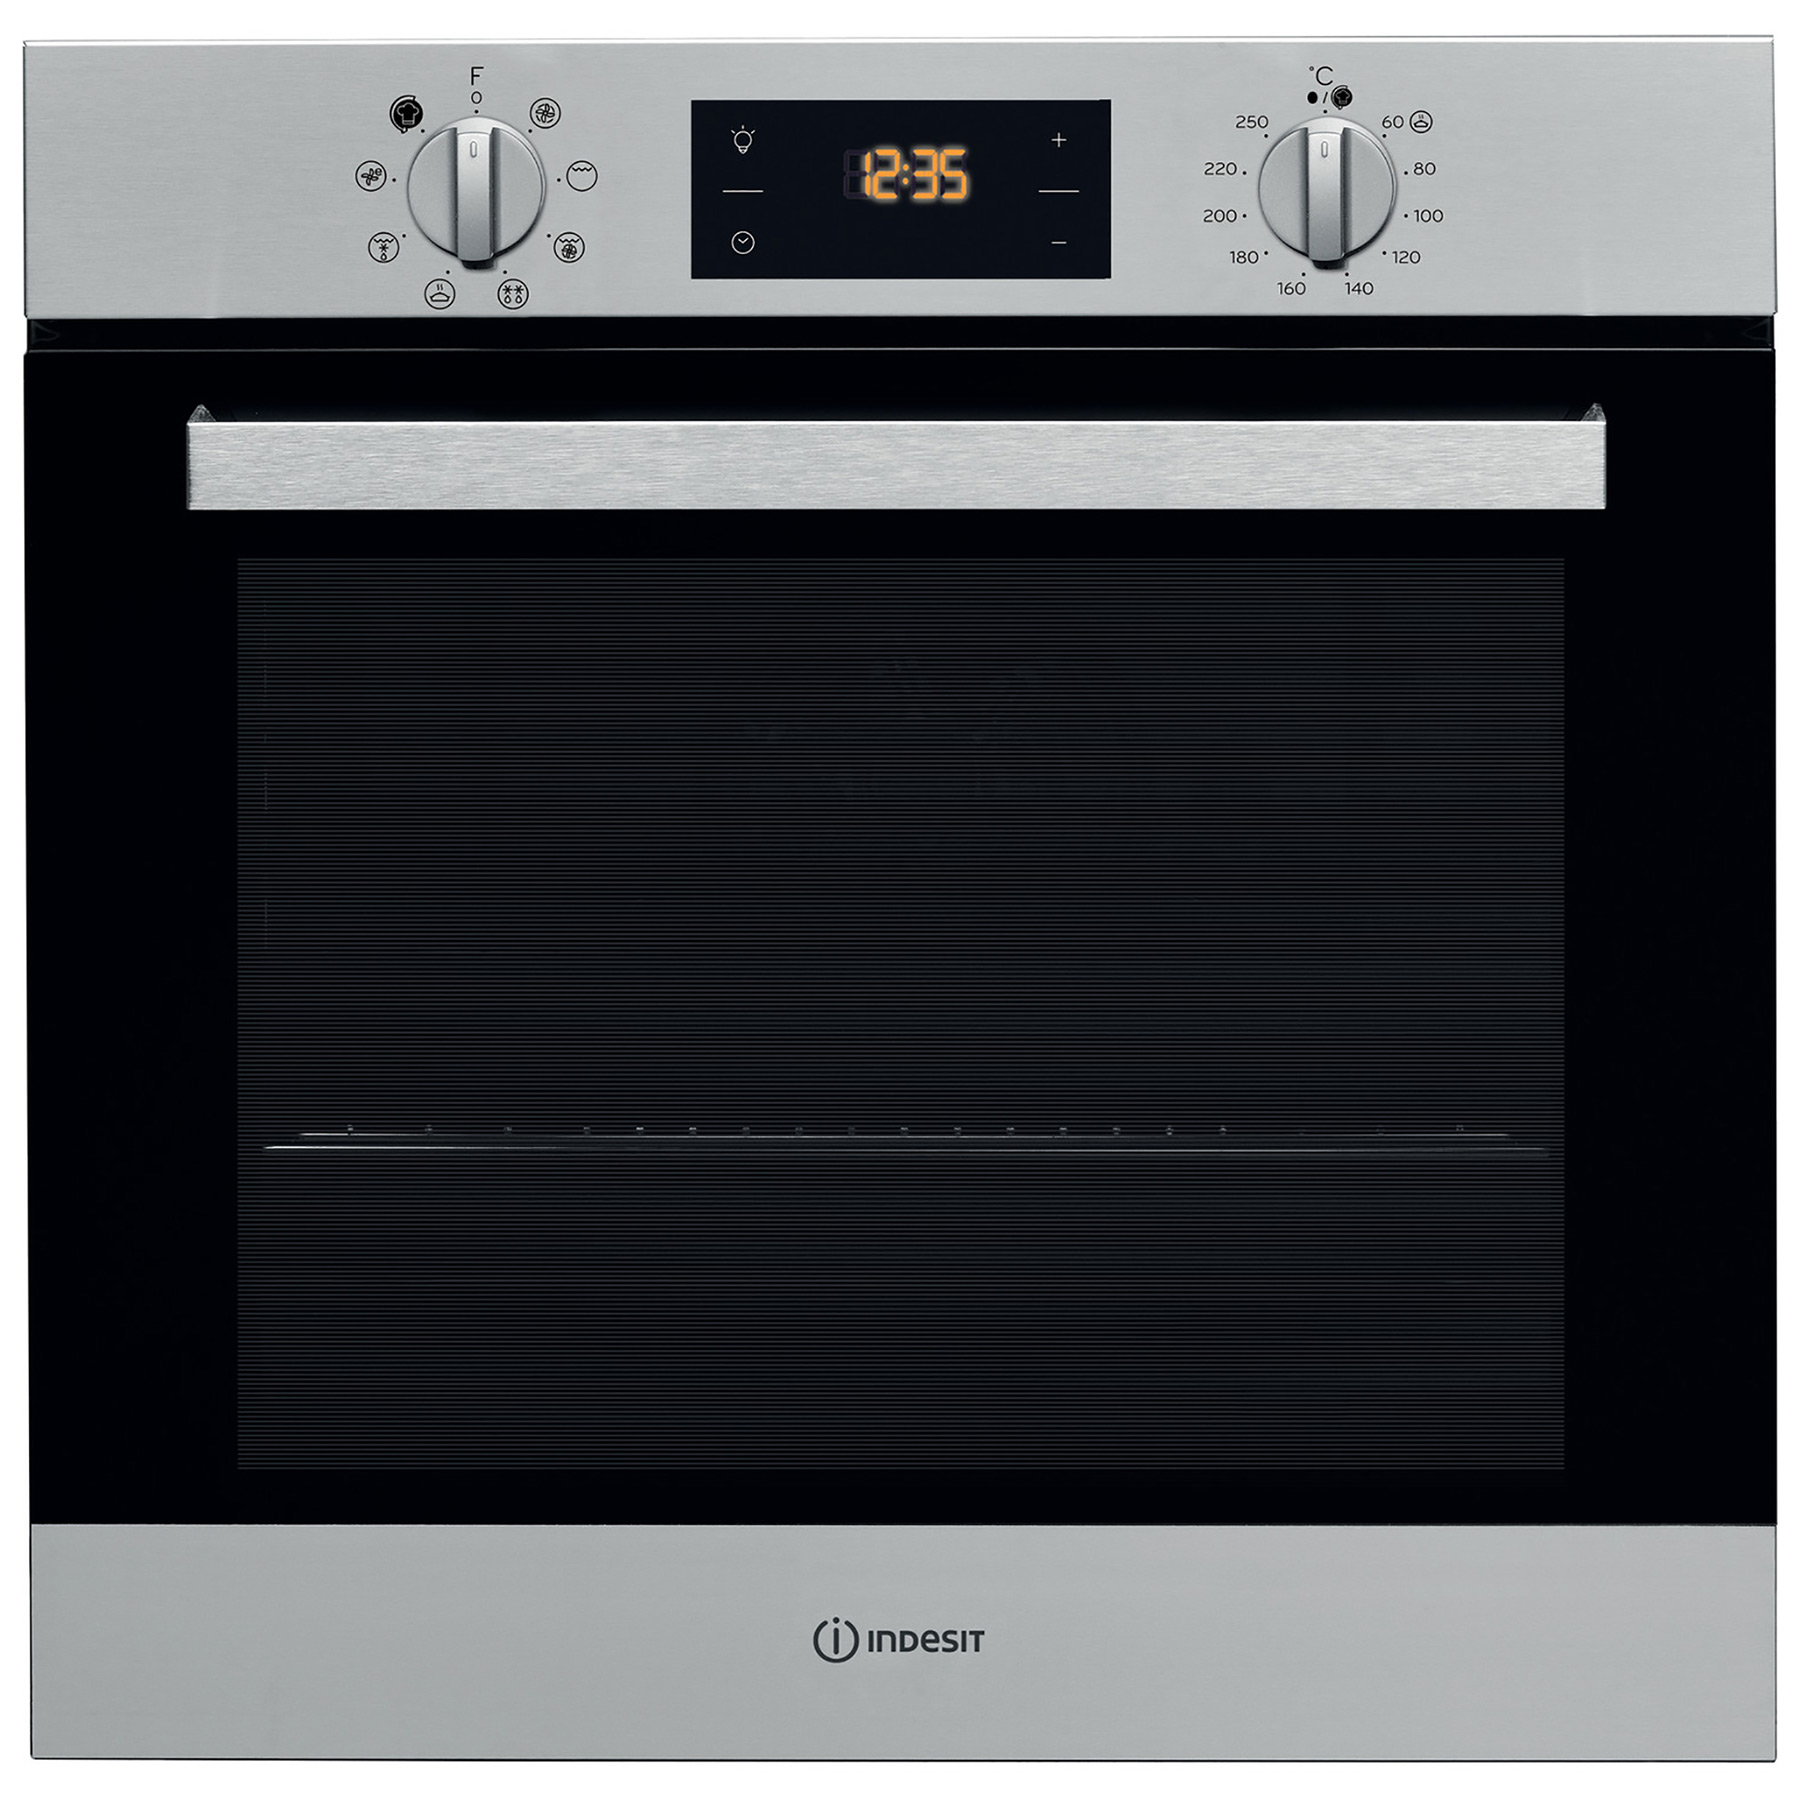 Indesit IFW6340IX Built In Electric Single Oven in St Steel 66L